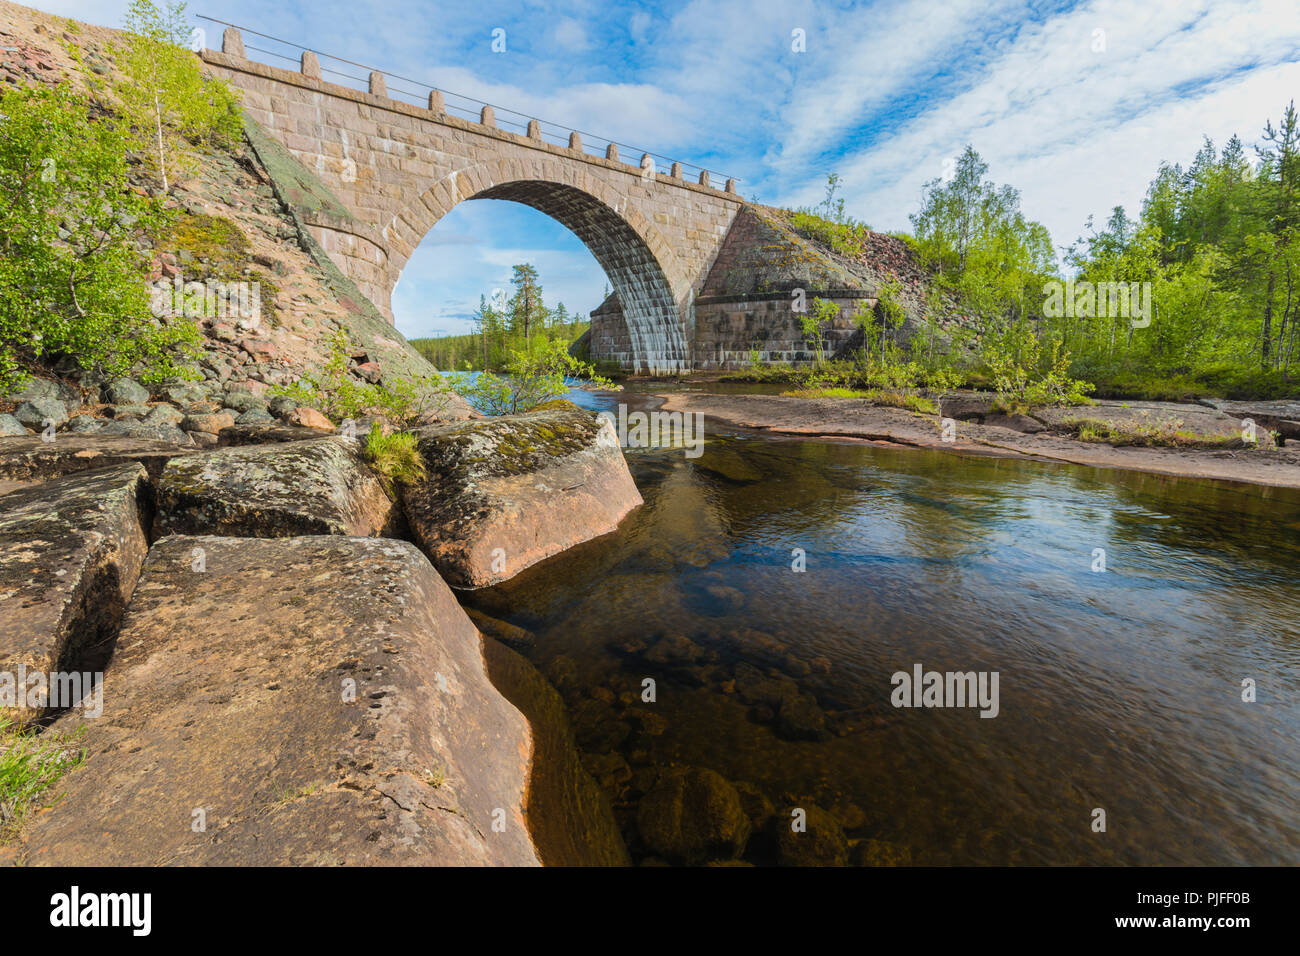 Old railroad bridge made of bricks with a portal, running water from river under it and forest in background, Jokkmokk county, Swedish Lapland, Sweden Stock Photo